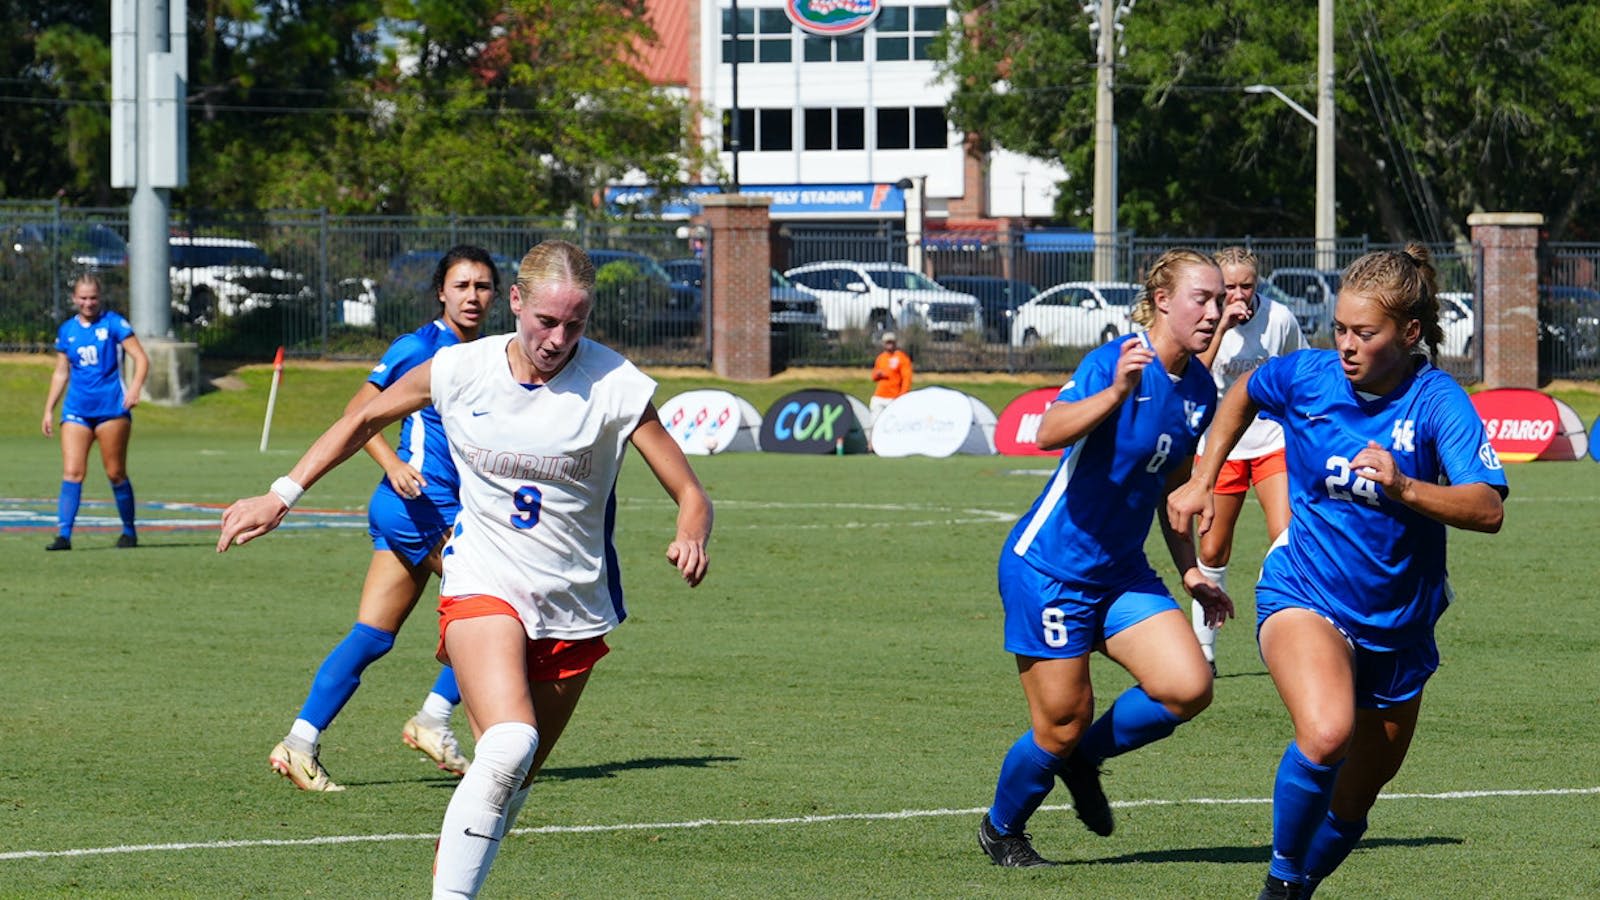 Florida soccer ready to roll with incoming offseason additions - The Independent Florida Alligator